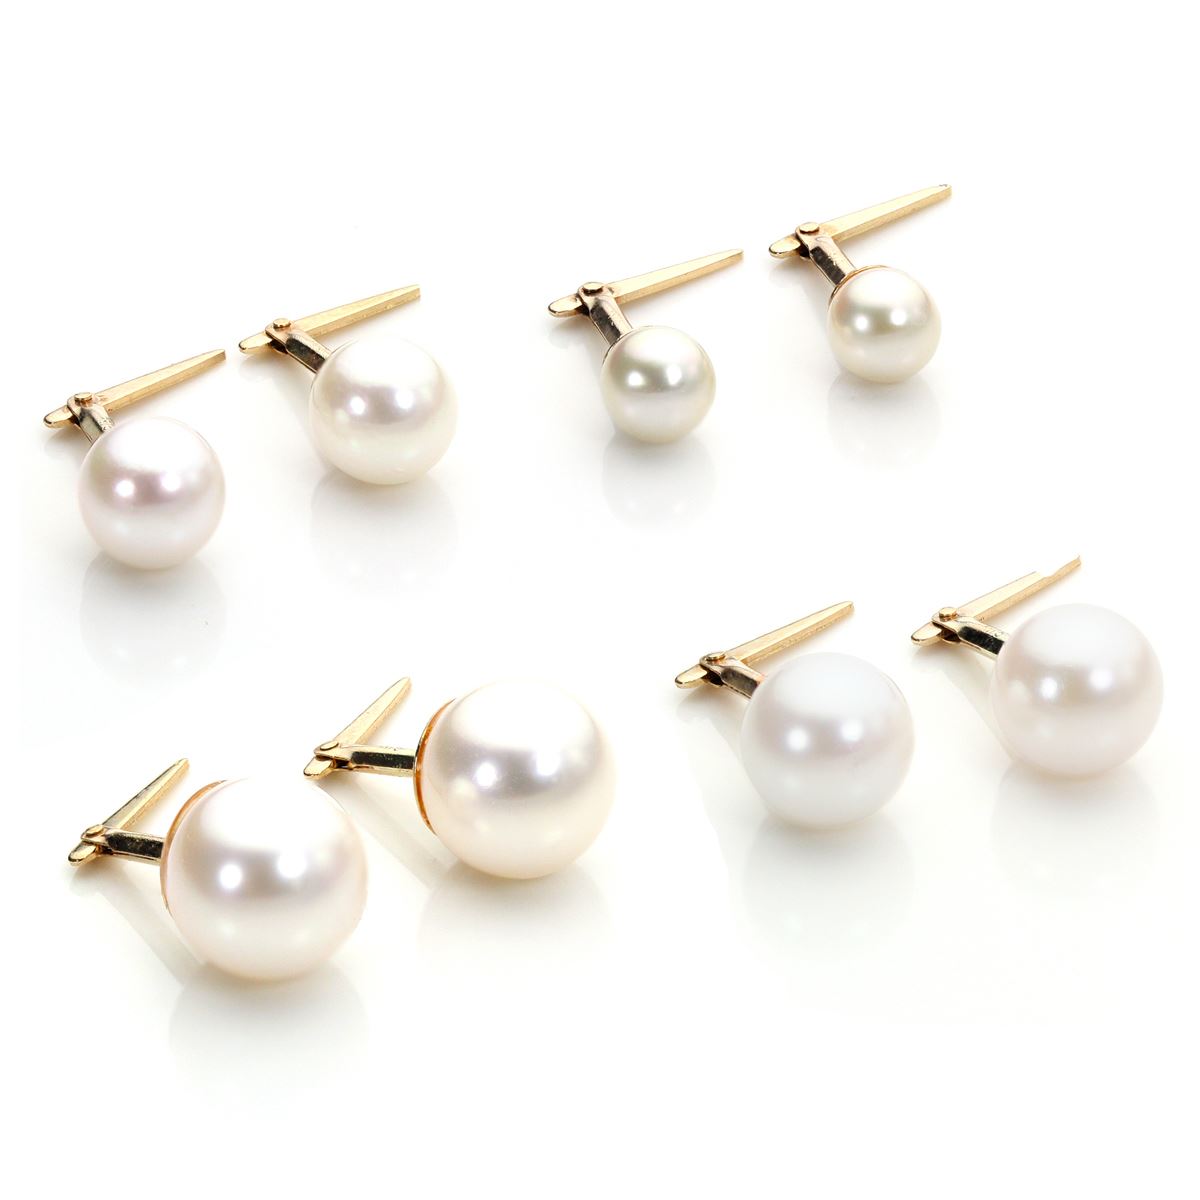 Andralok 9ct Yellow Gold Cultured Pearl June Birthstone Stud Earrings